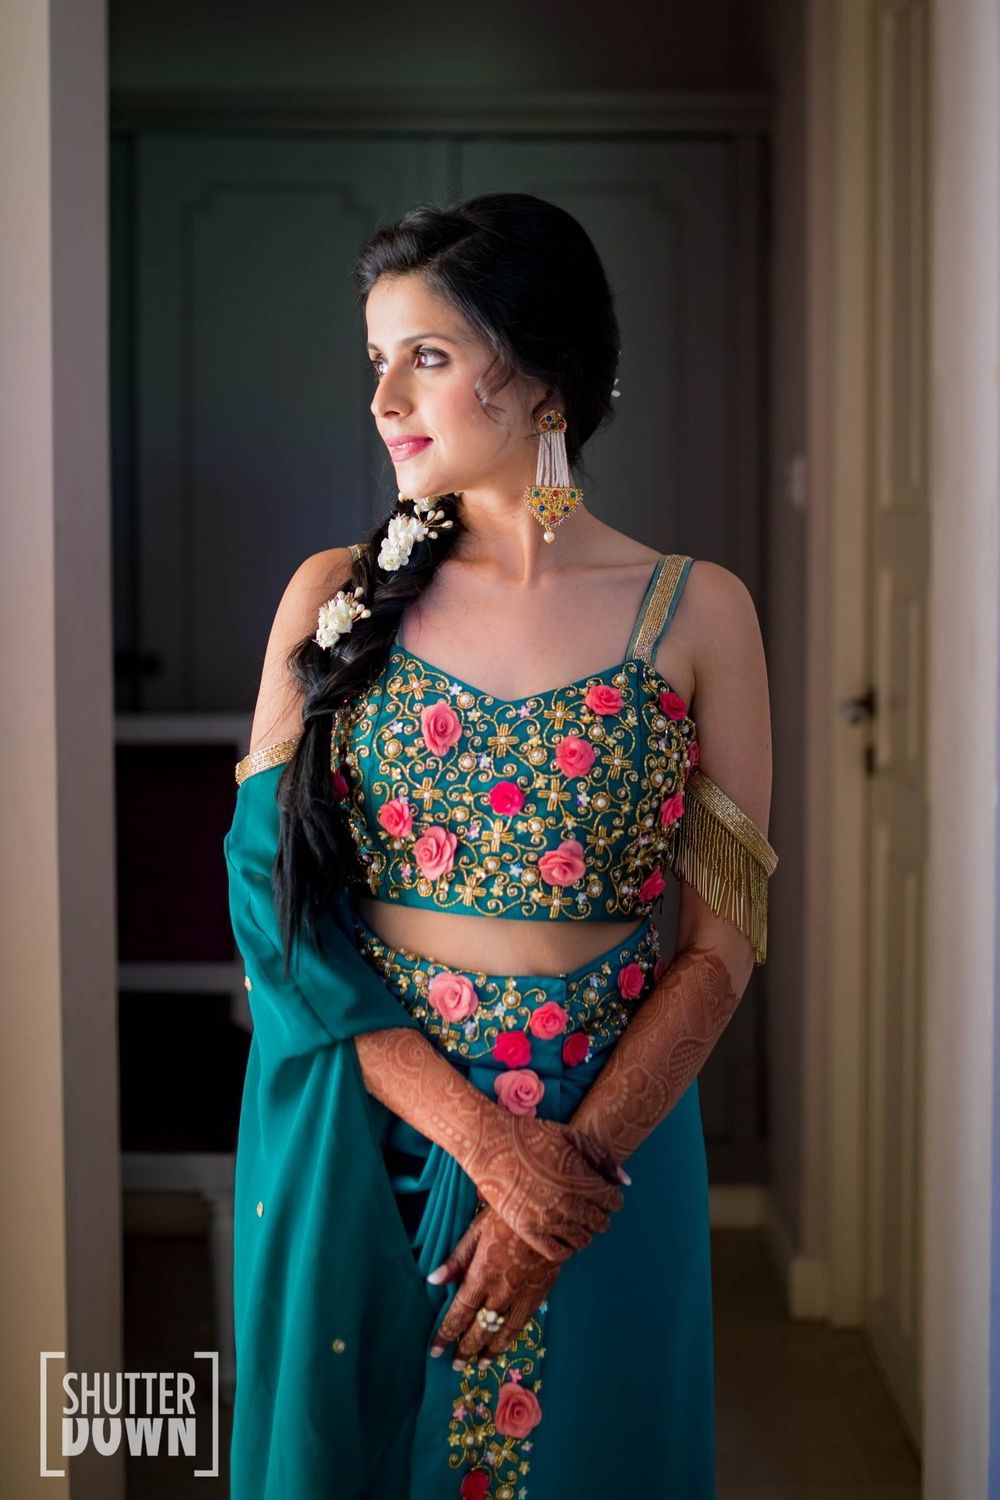 Photo of Teal mehendi outfit with side braid